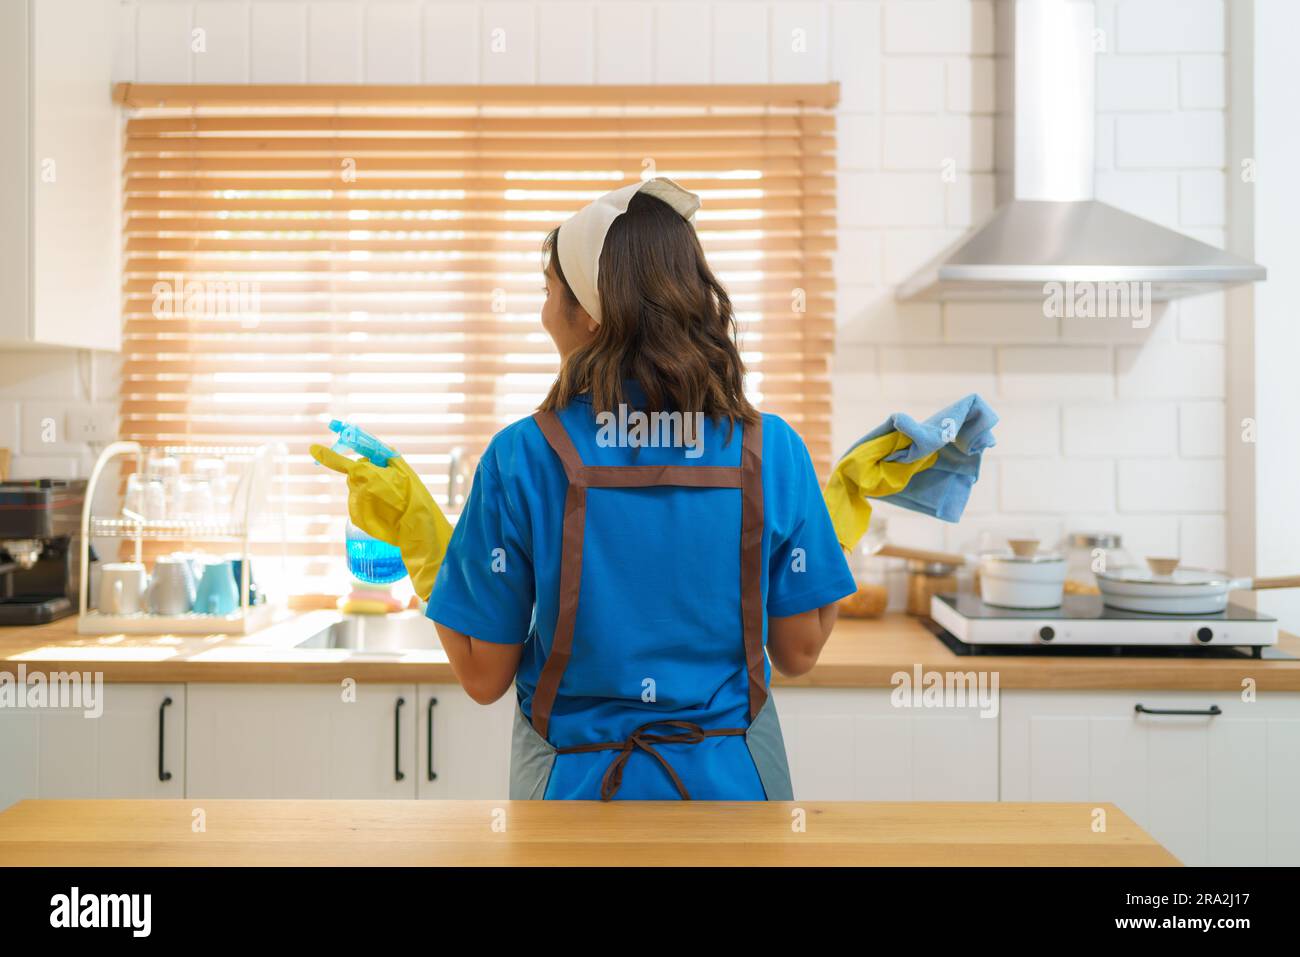 Efficient and resourceful, an Asian housewife confidently holds a tablecloth and sprayer in the kitchen, showcasing her dedication to maintaining a cl Stock Photo